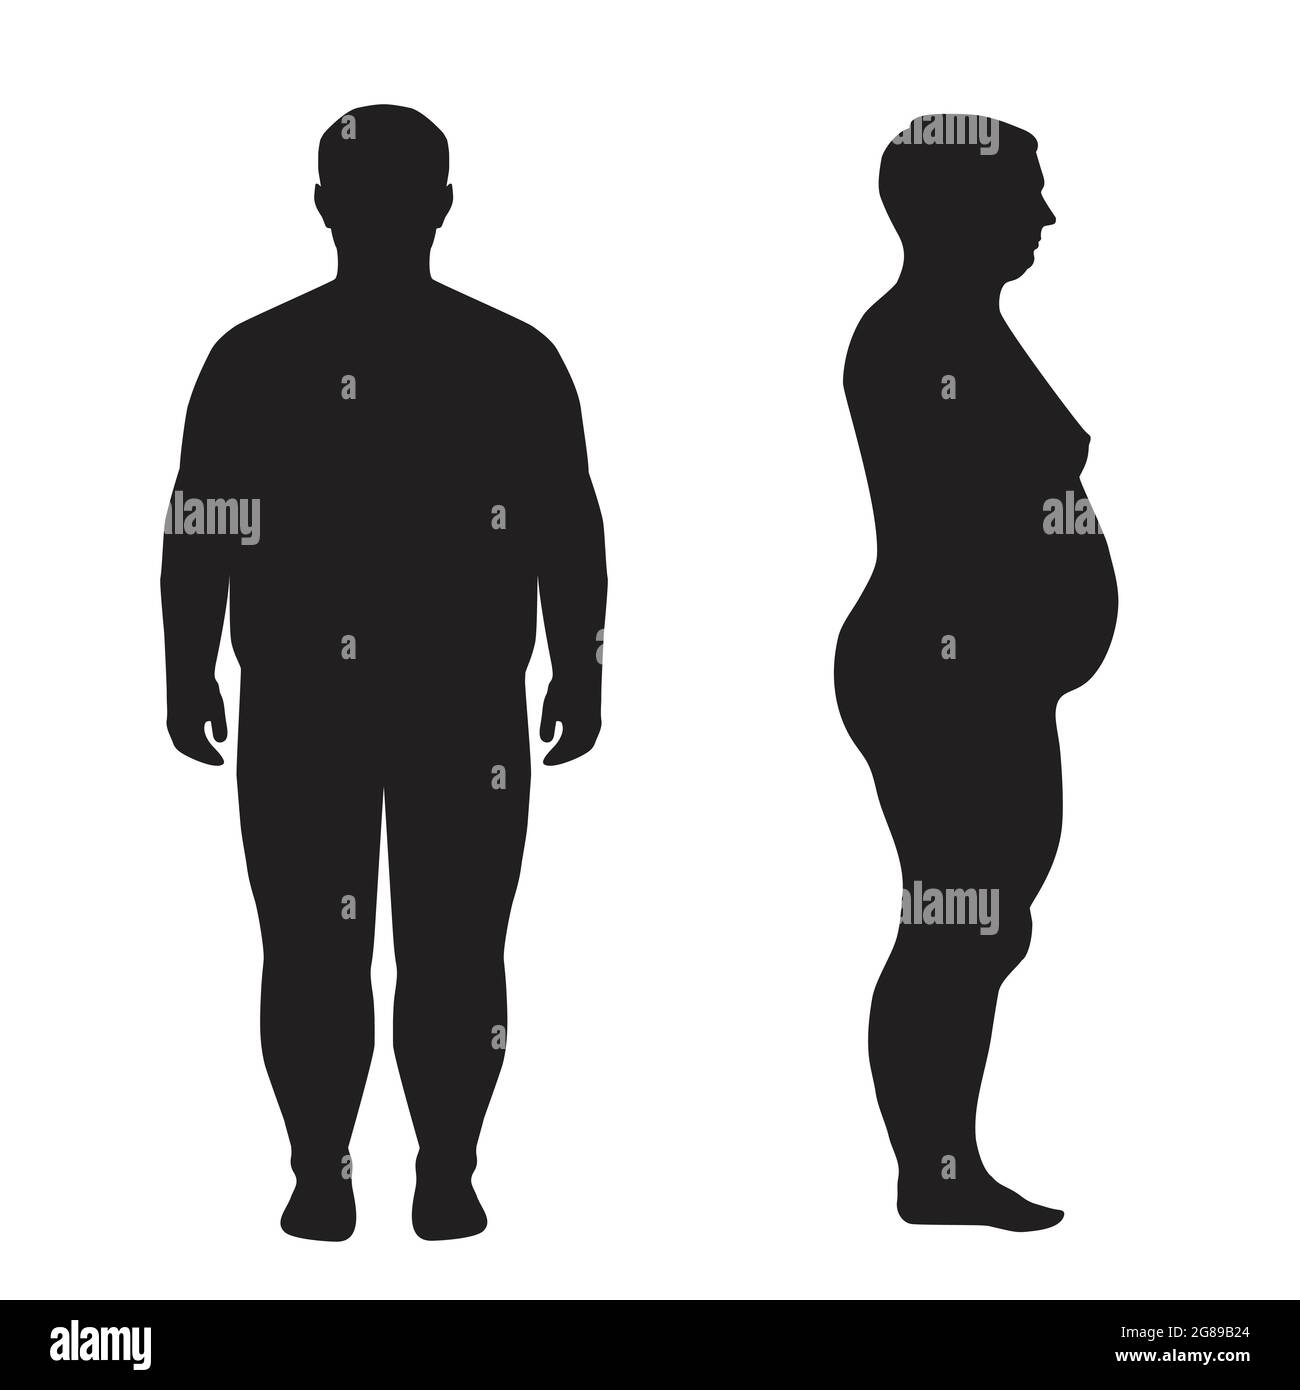 vector fat body, weight loss, man overweight silhouette illustration Stock Vector